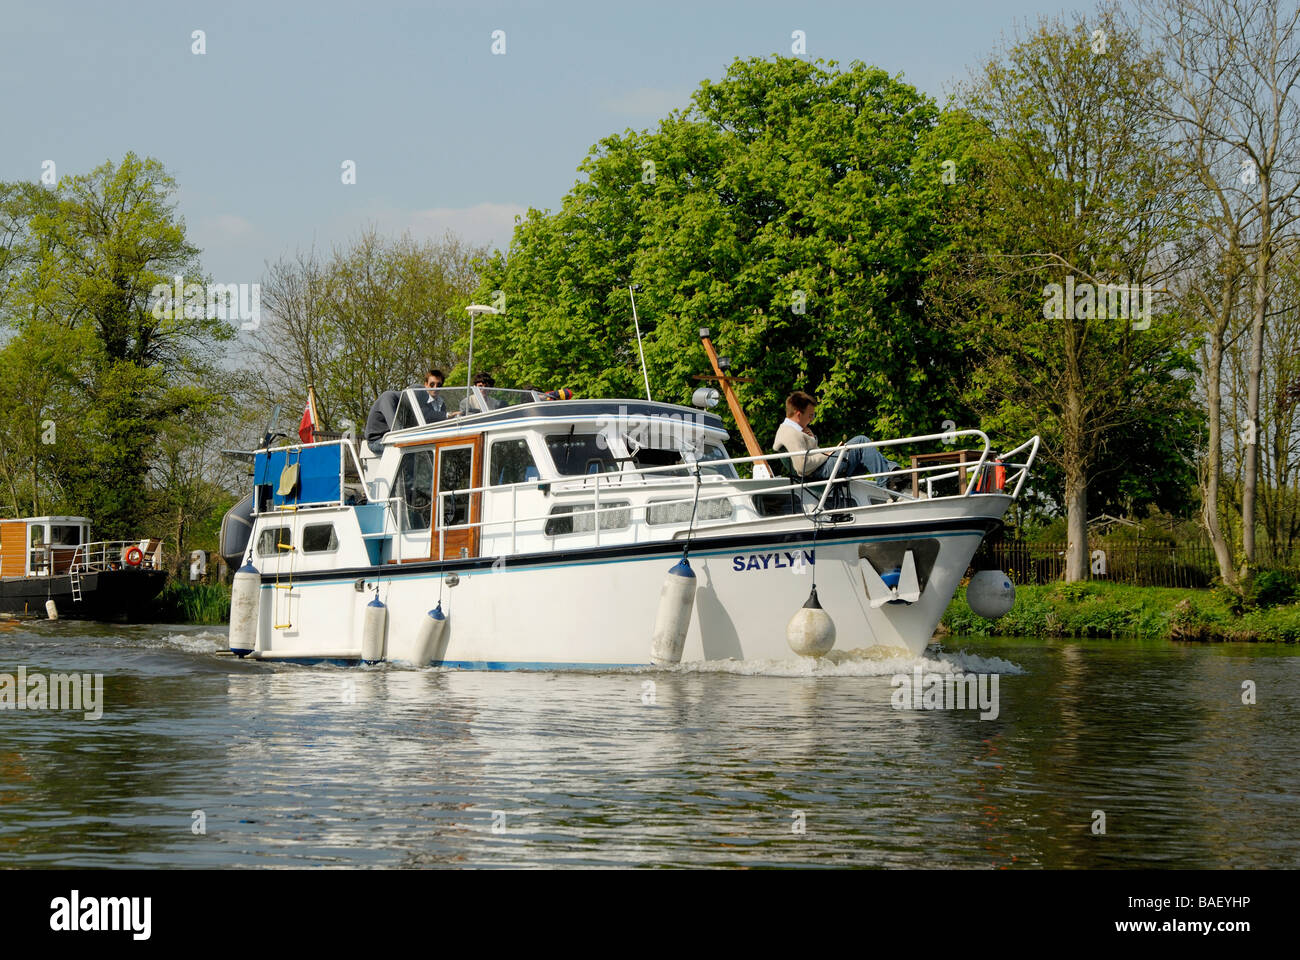 Steel hulled motor cruiser with young men at the helm and on deck, River Thames below Chertsey, Surrey, England Stock Photo